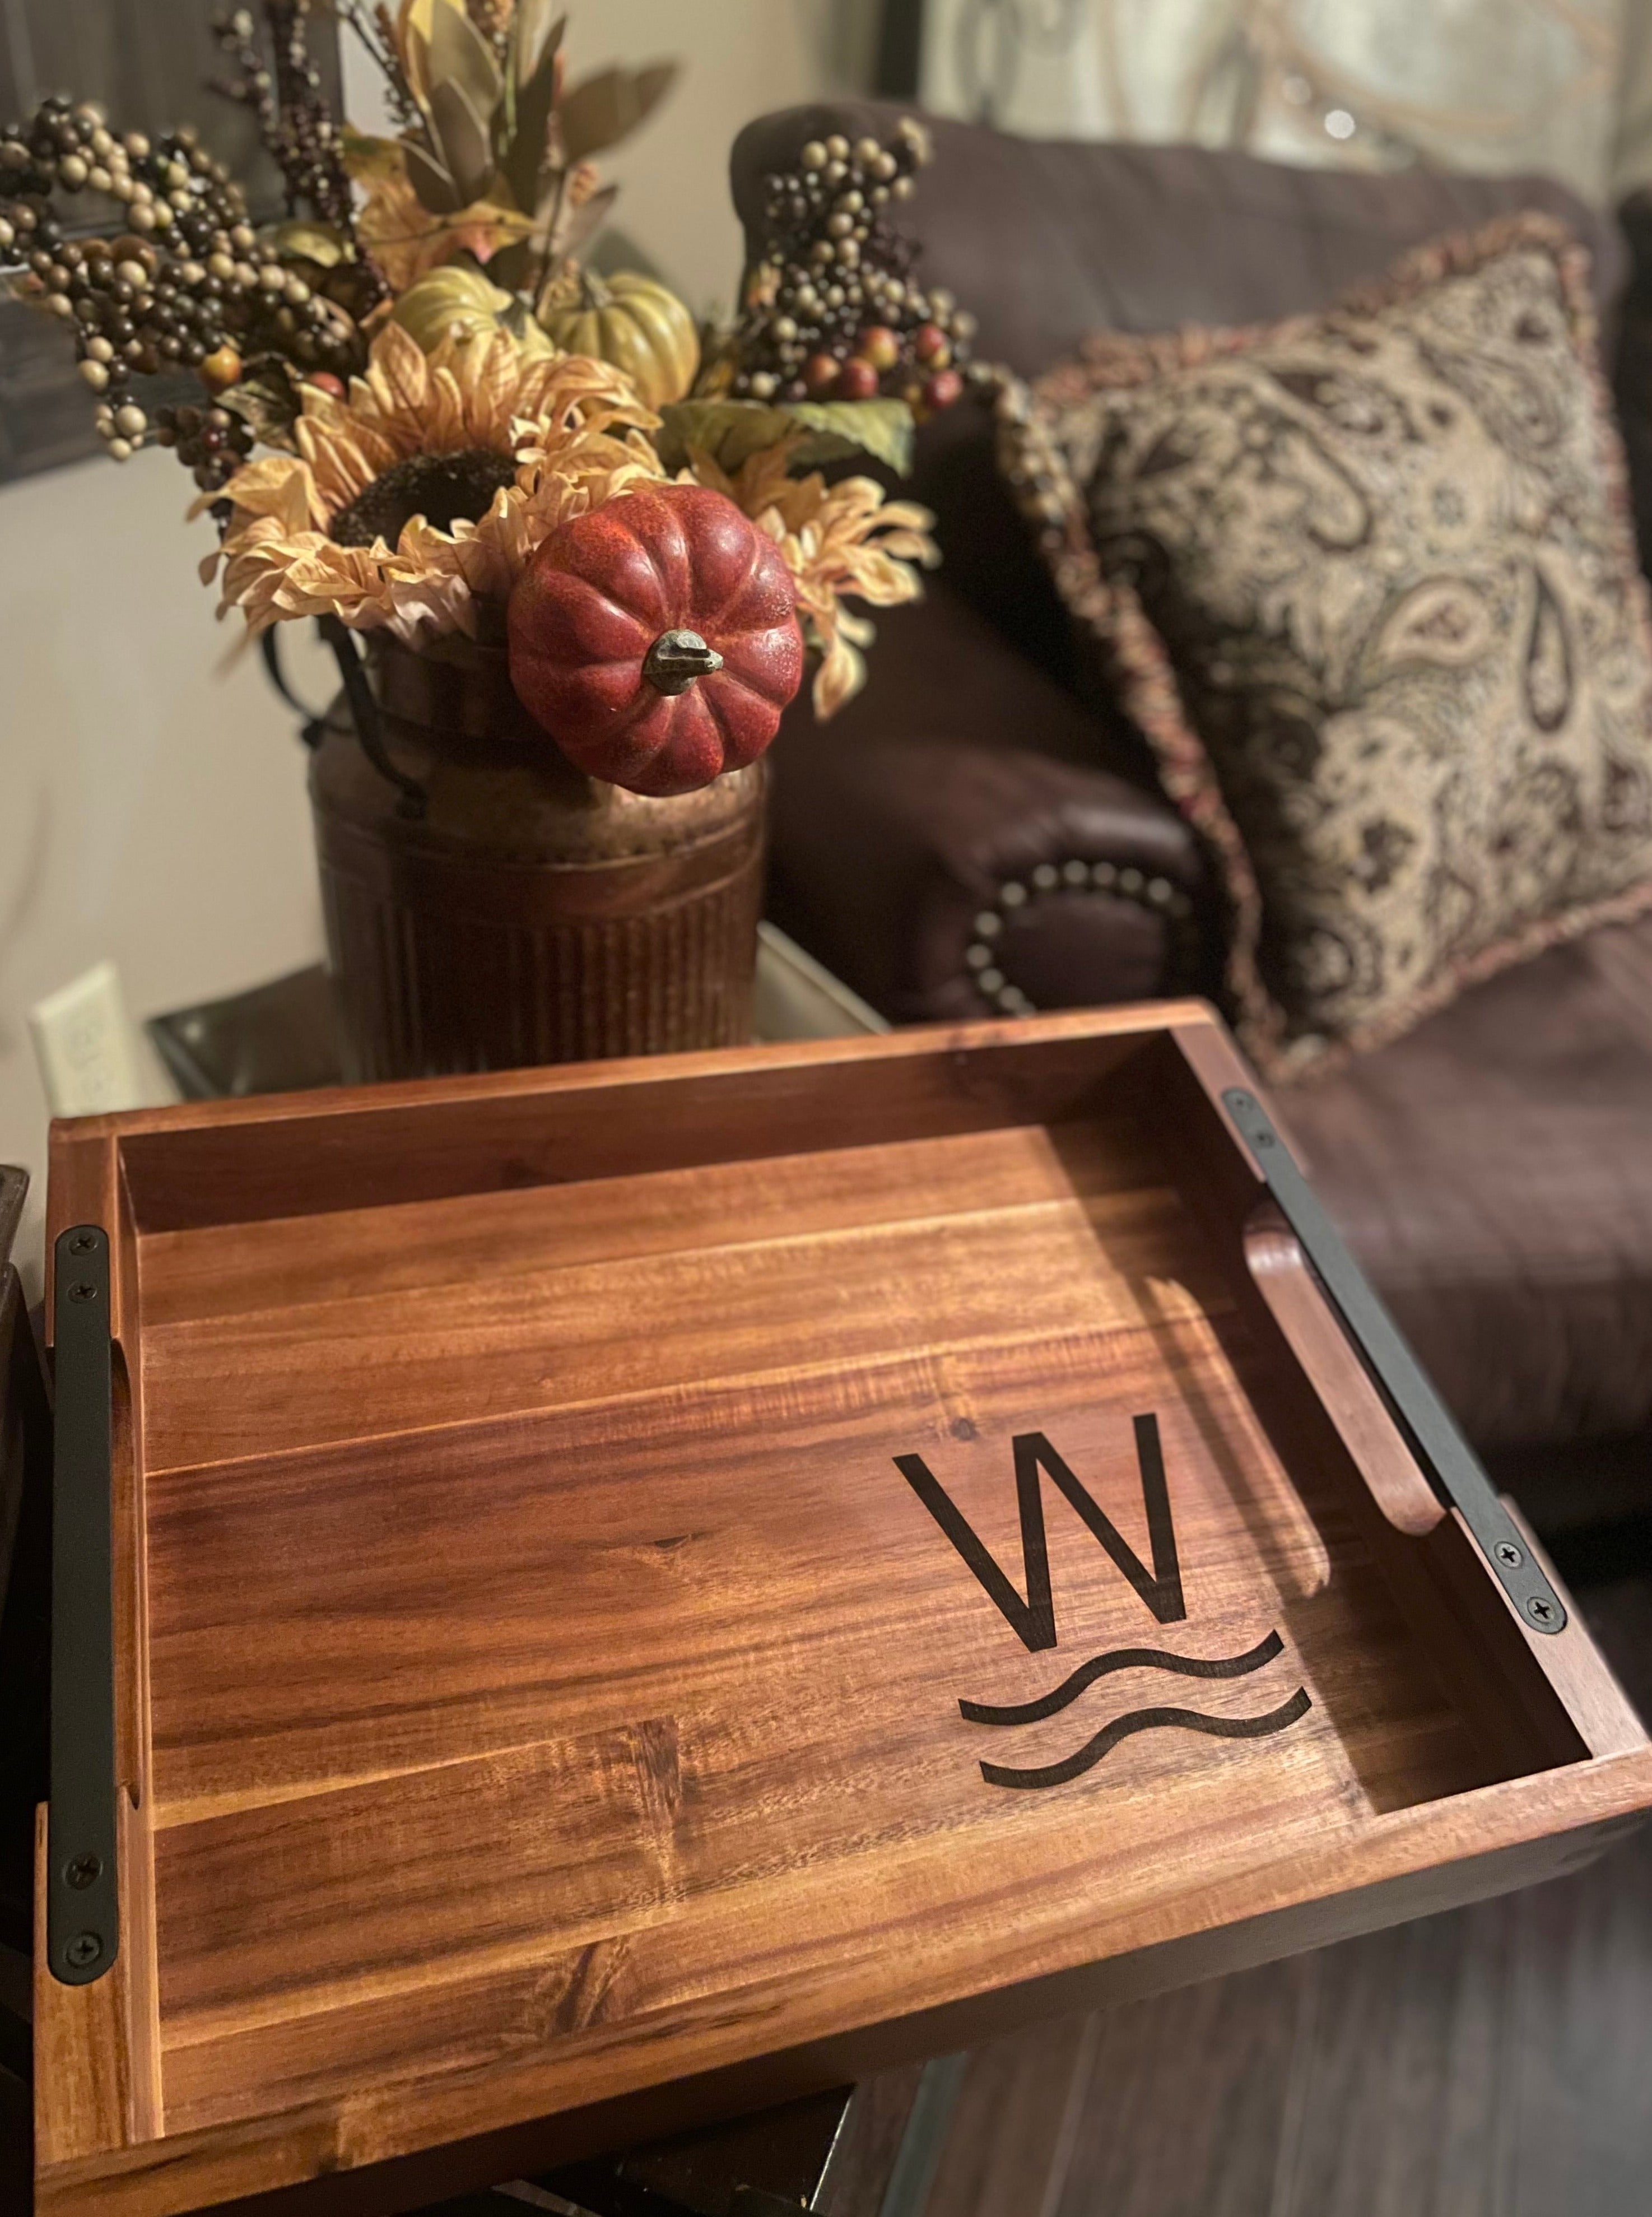 Decorative wooden tray engraved with ranch brand or business logo. Wood with Metal Handles